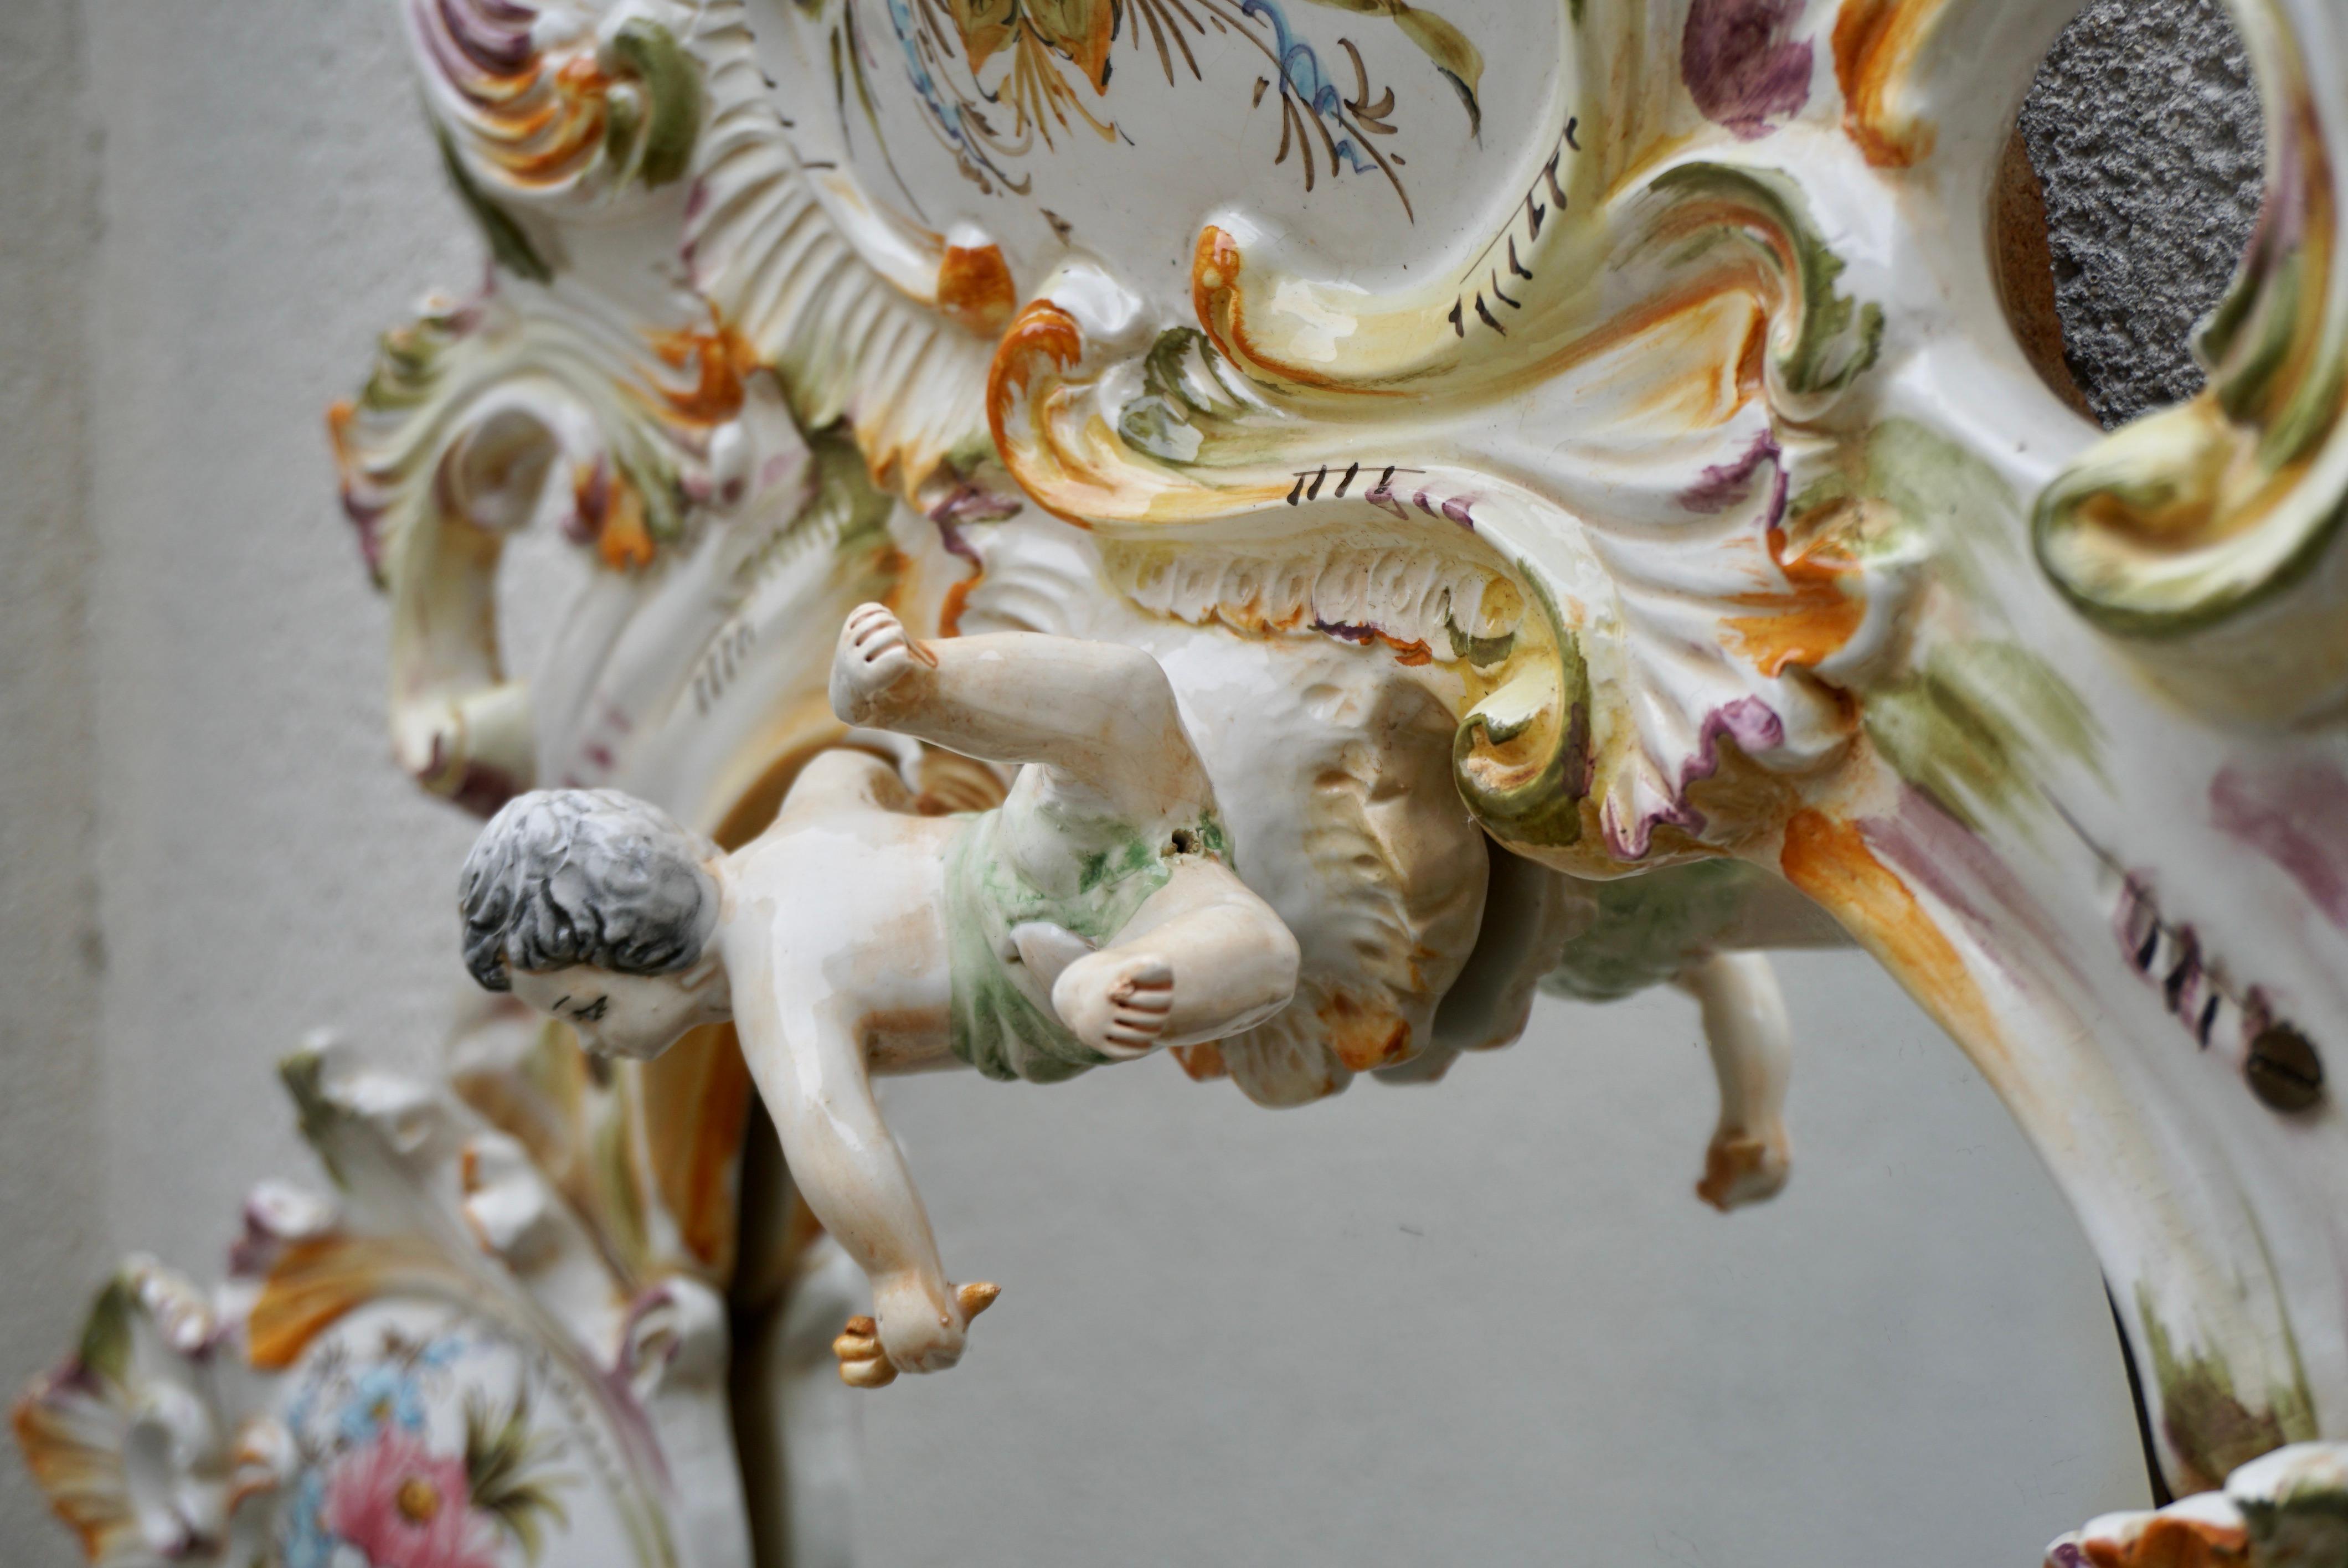 Mid-20th Century Italian Capodimonte Porcelain Mirror with Flowers and Cherubs For Sale 5